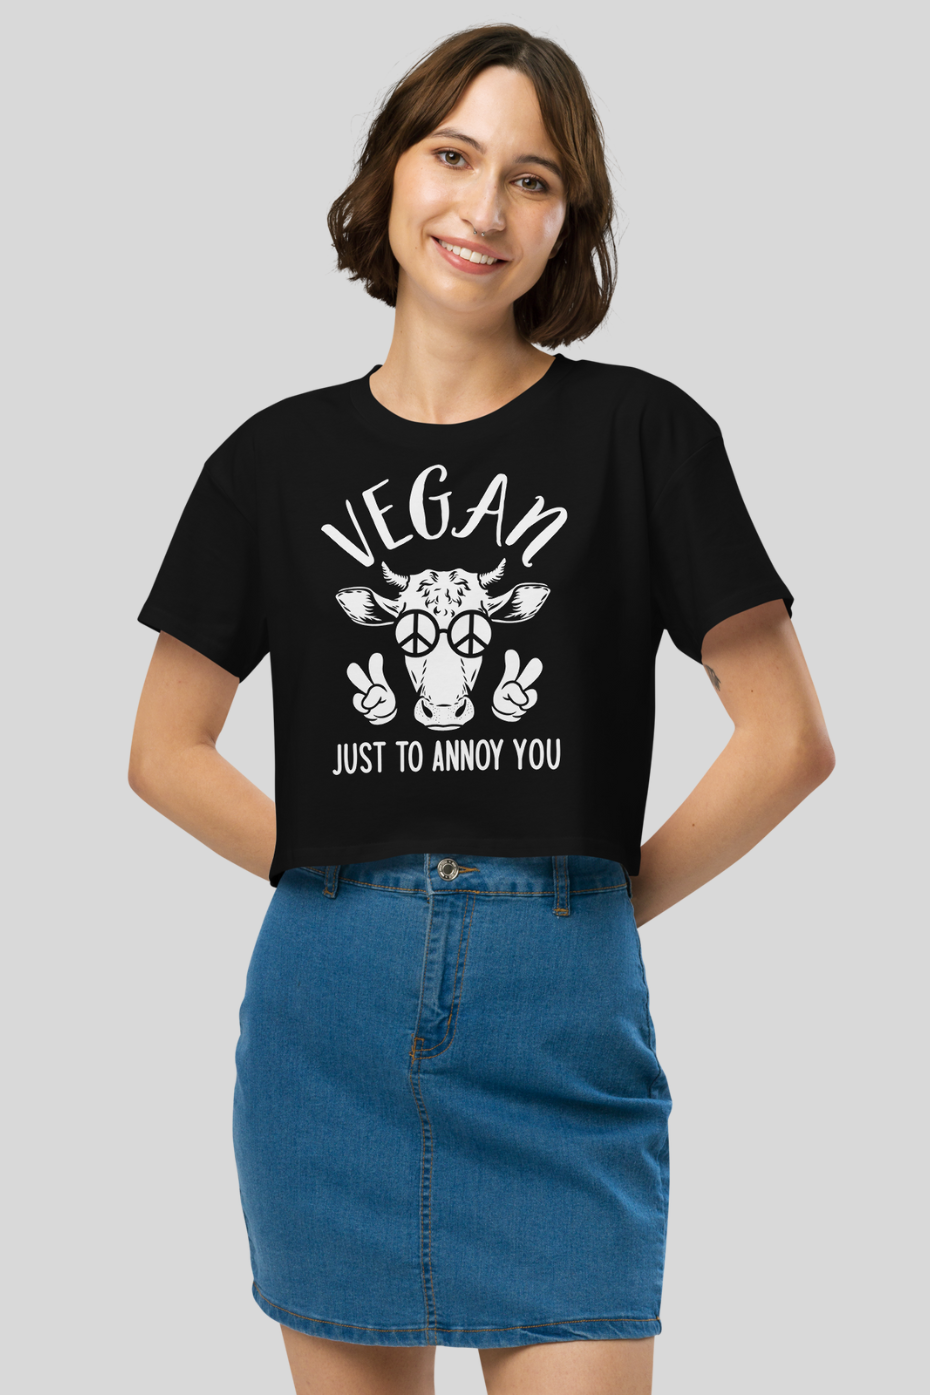 Just To Annoy You - Women’s crop top